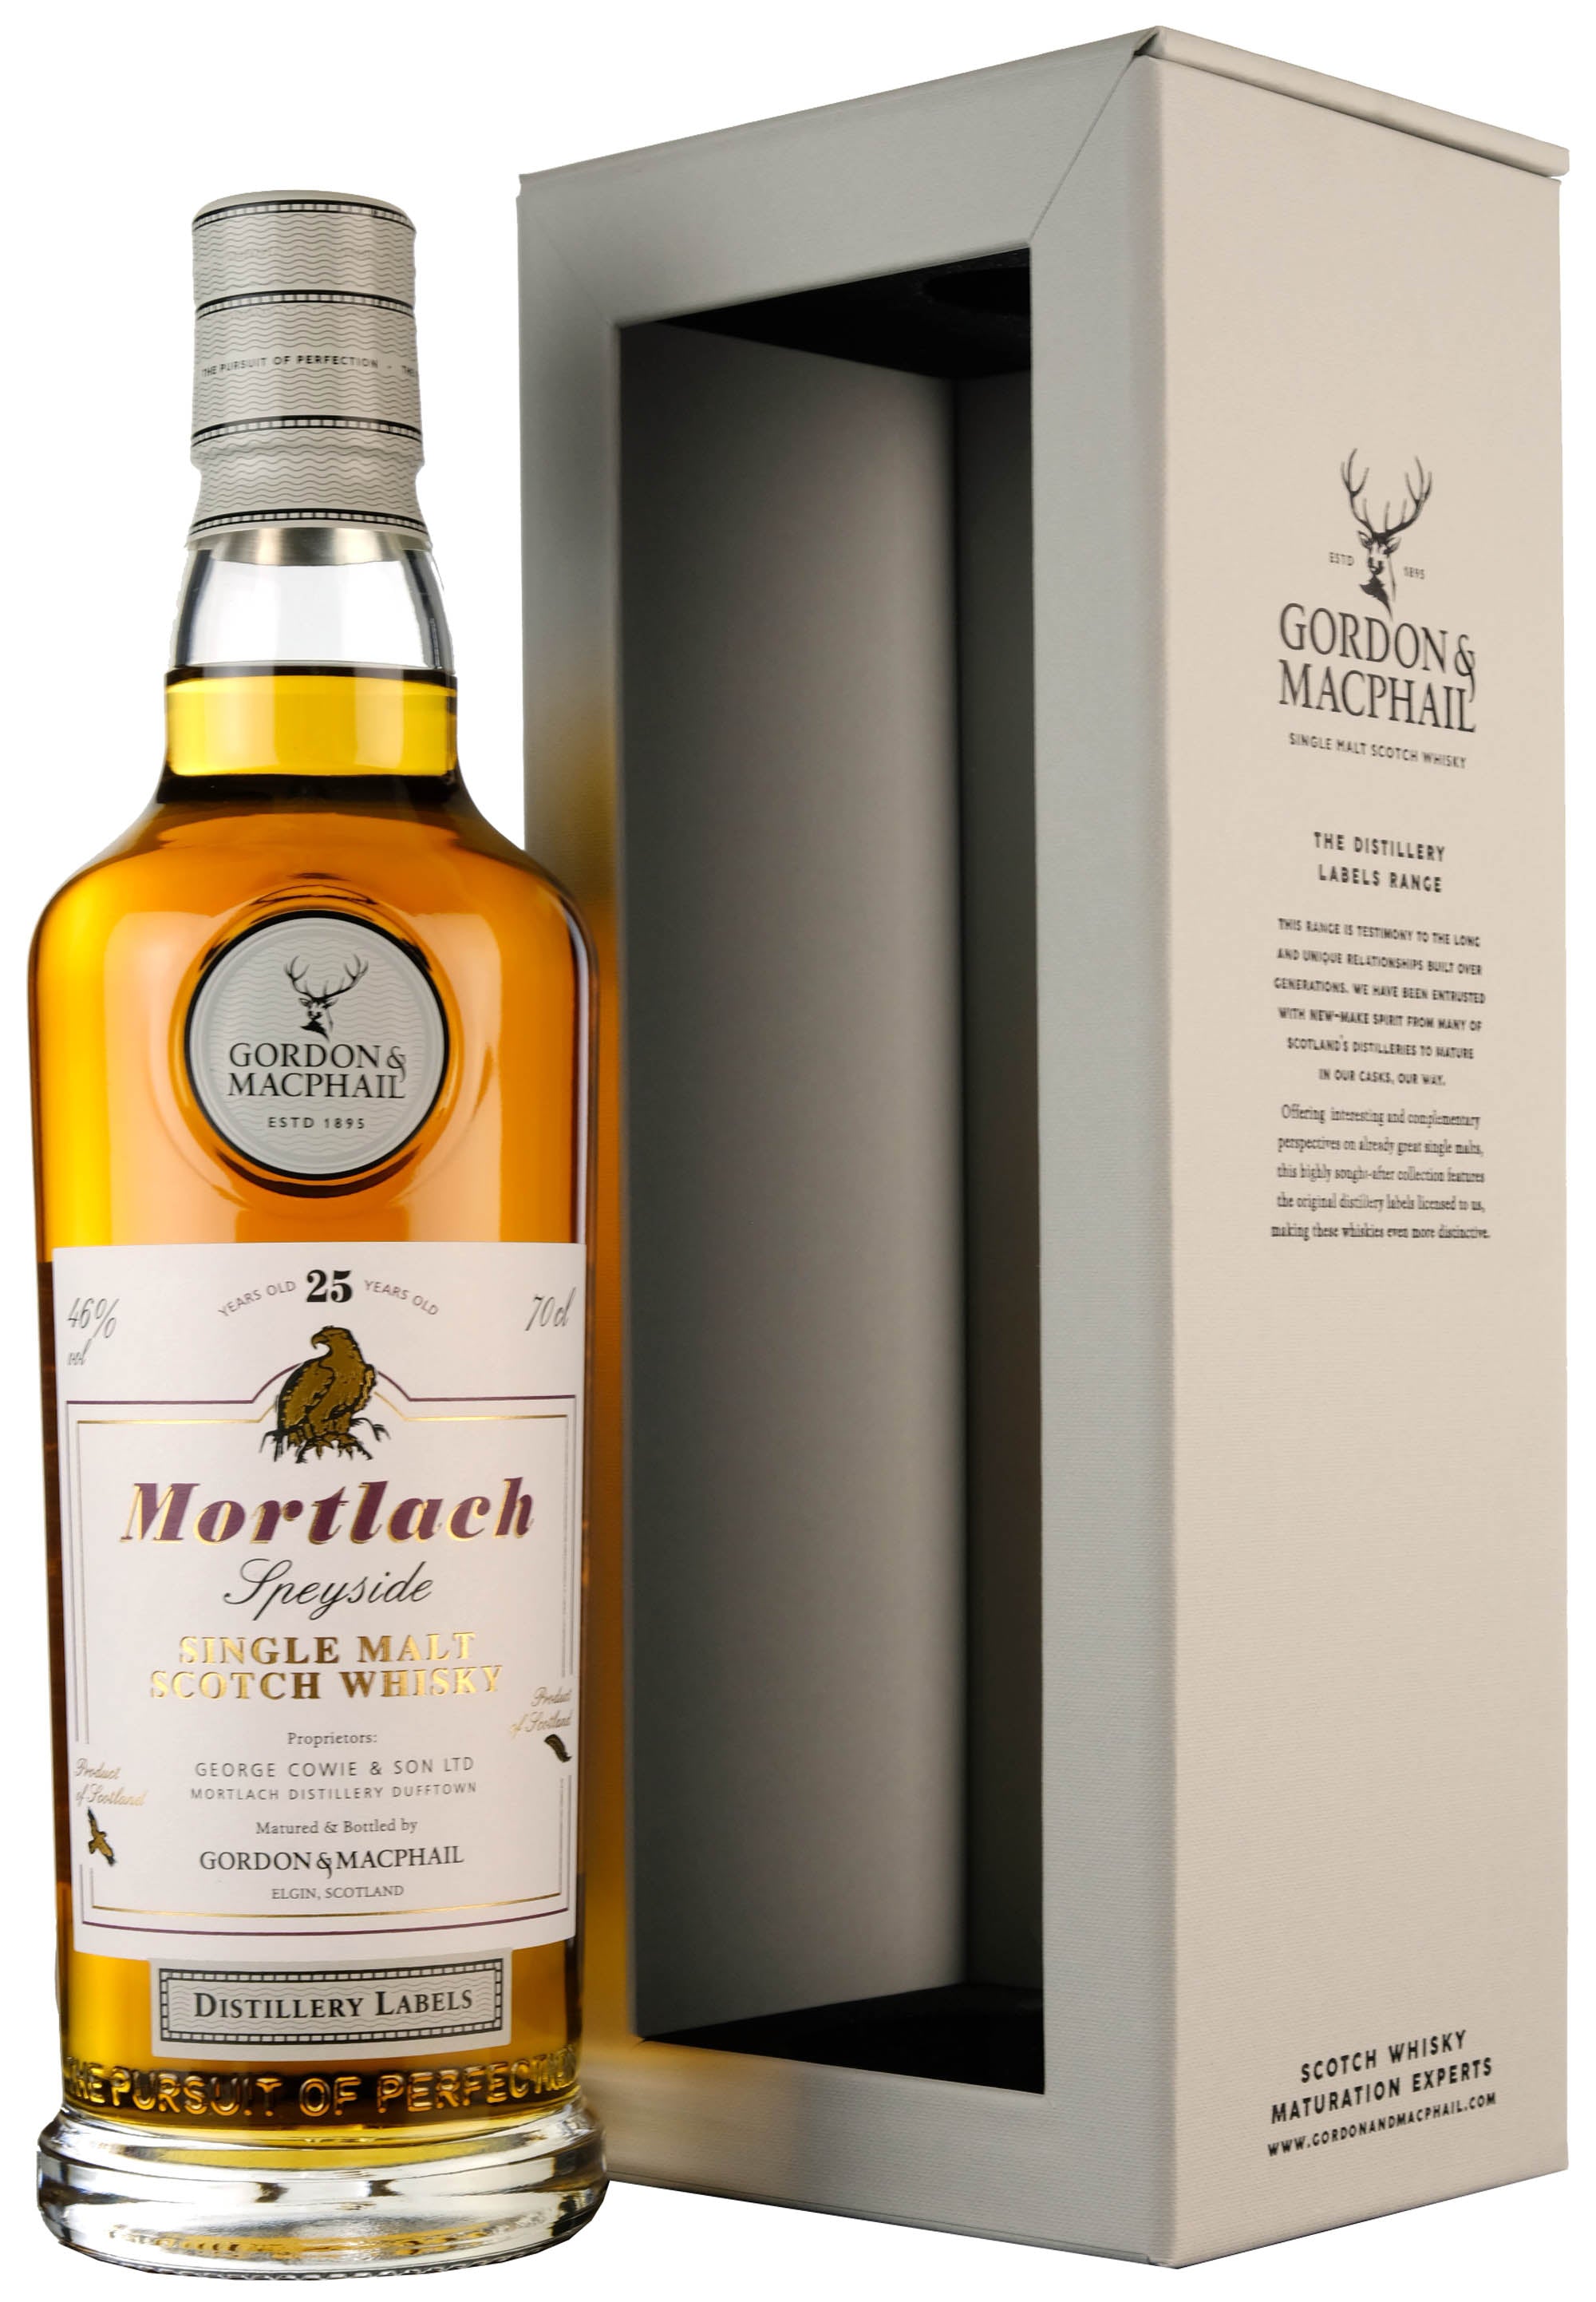 Mortlach 25 Year Old Distillery Labels